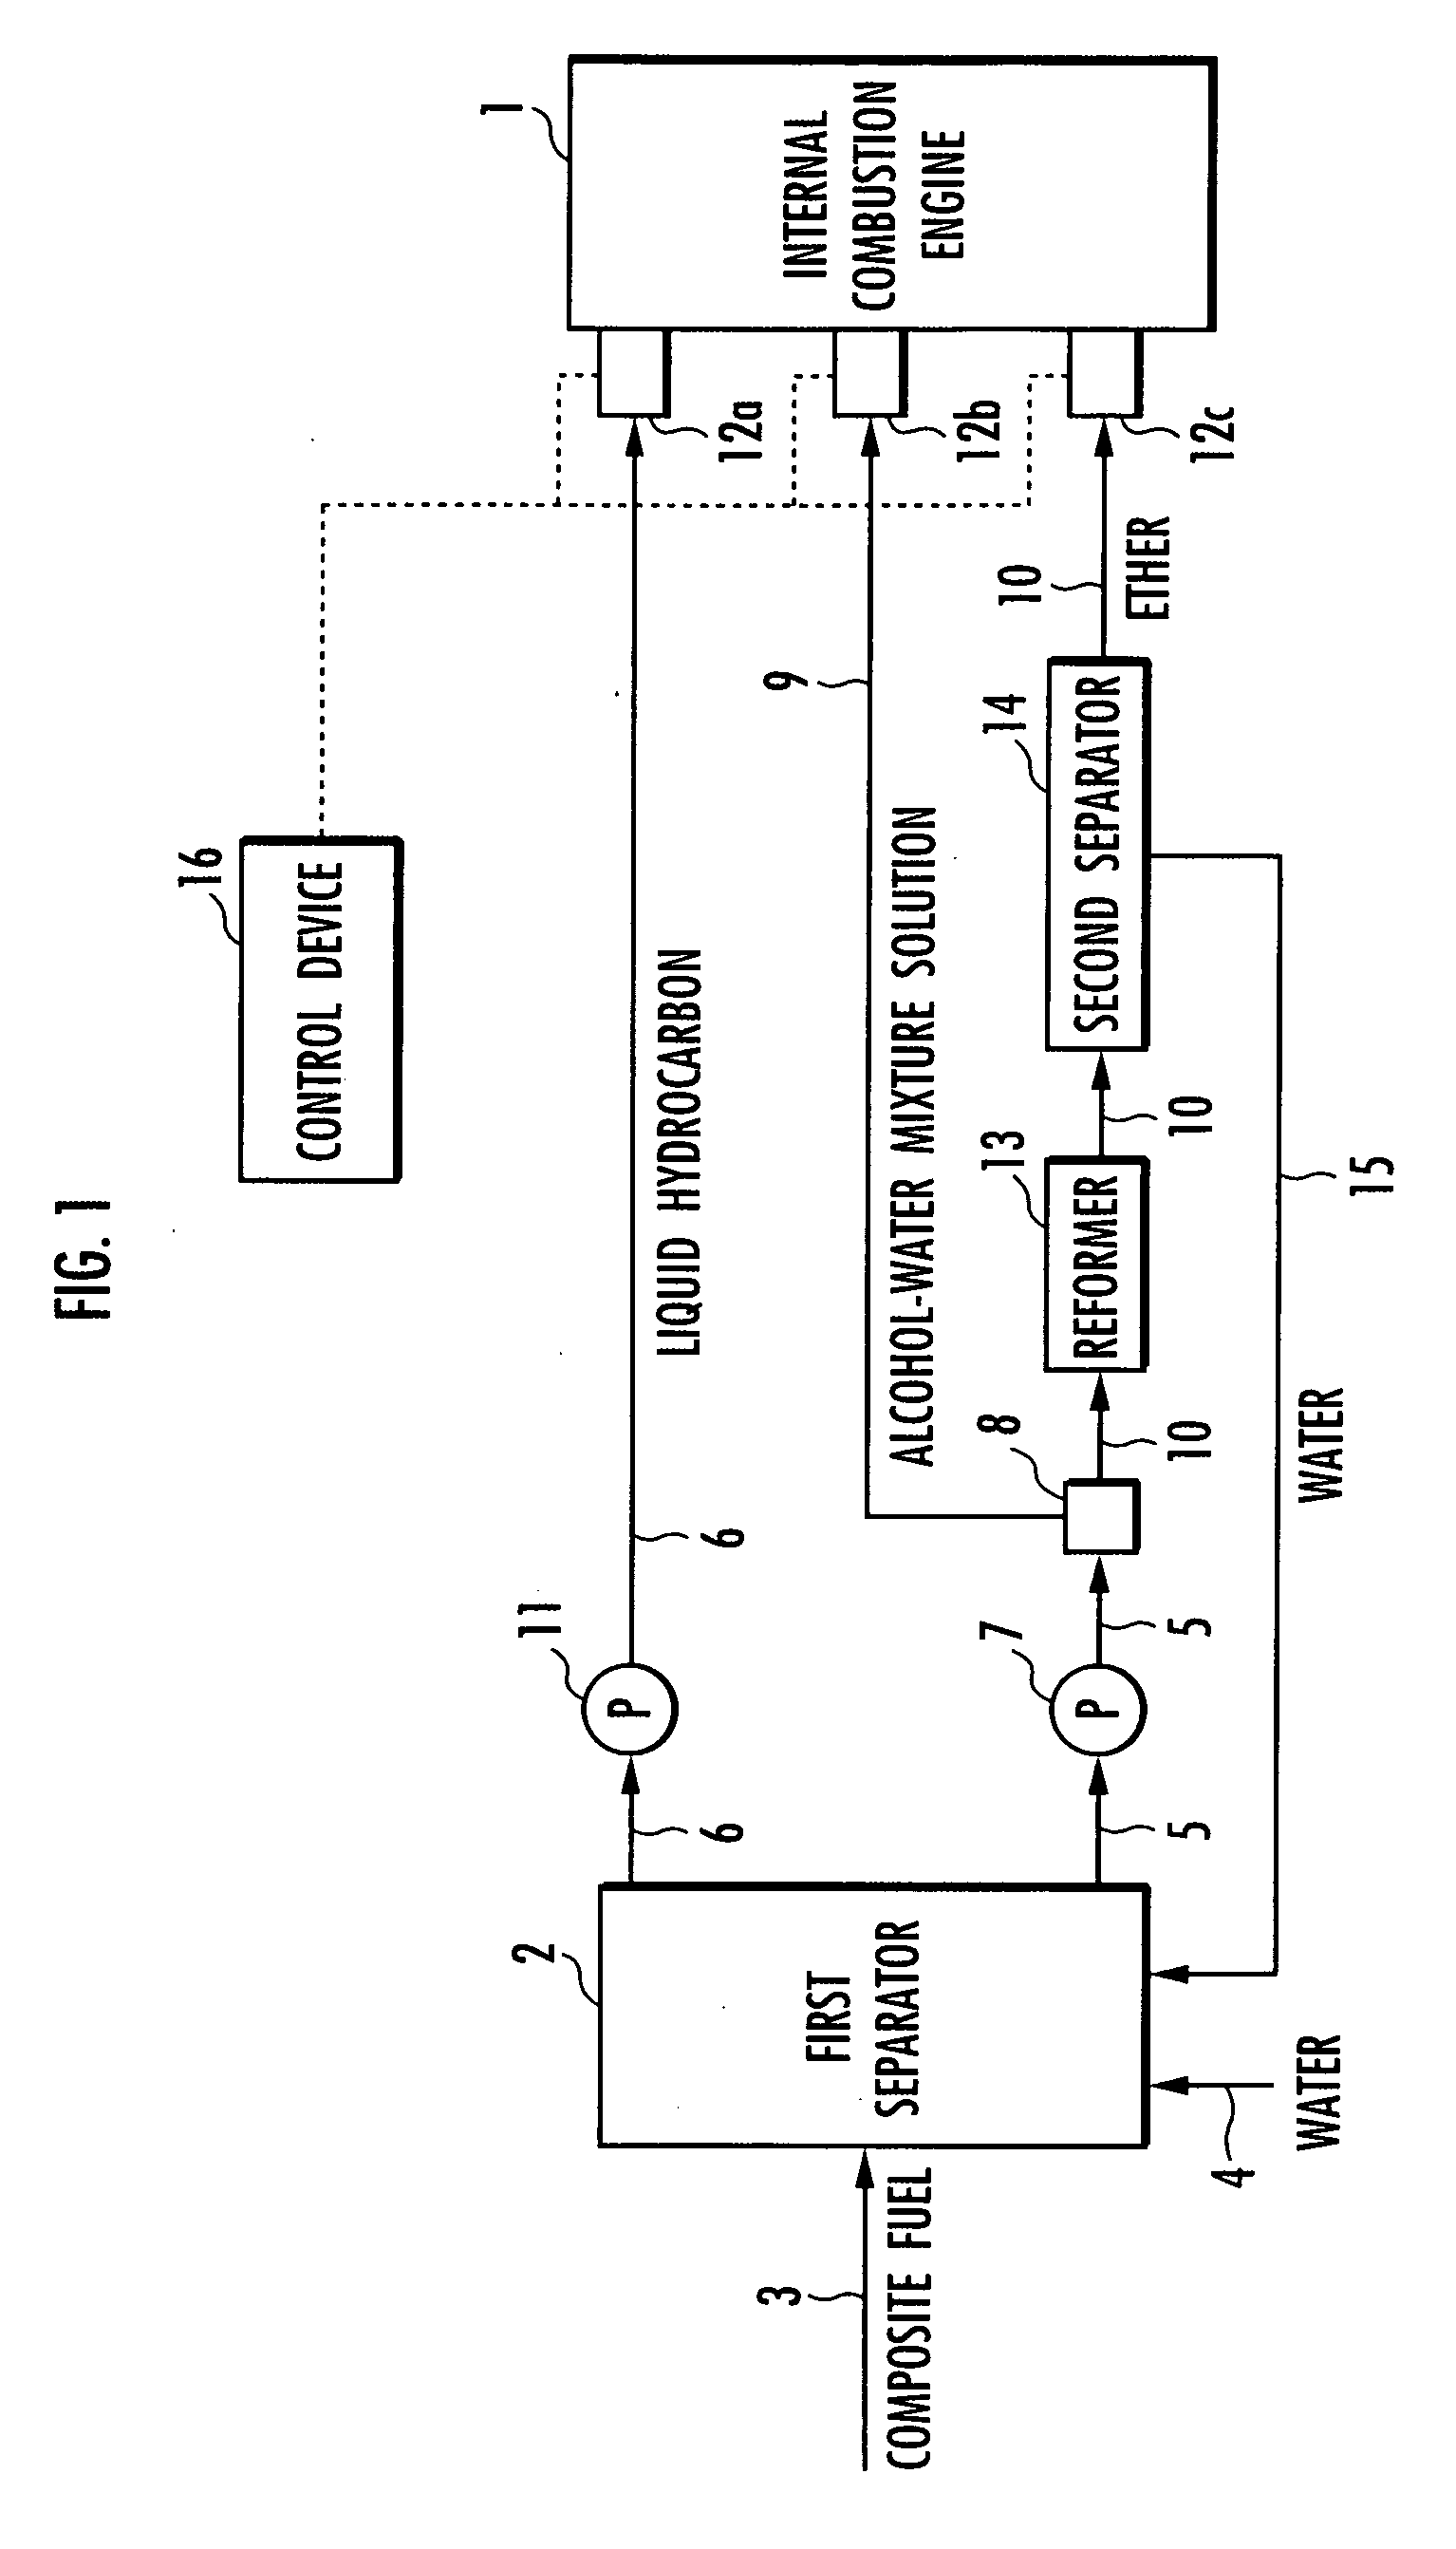 Homogeneous charge compression ignition internal combustion engine